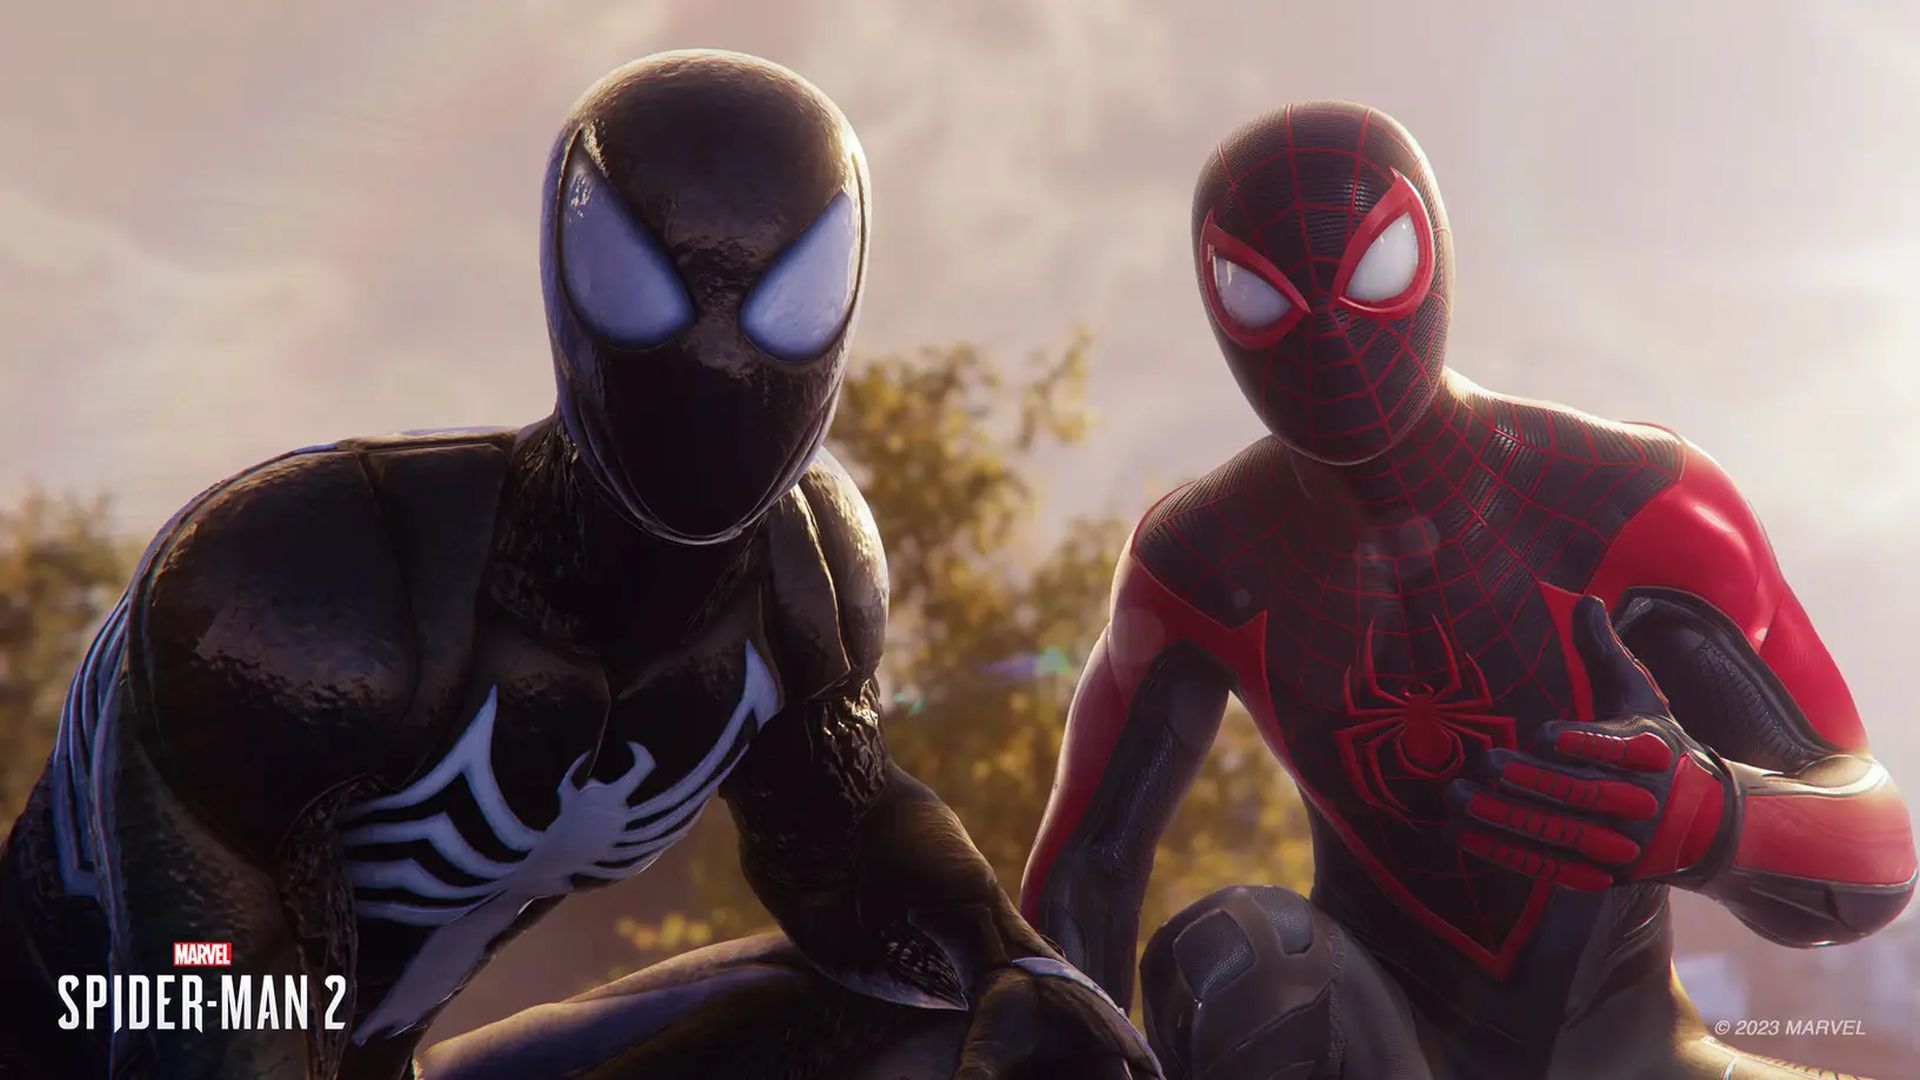 Marvel’s Spider-Man 2 – Digital Deluxe Edition Suits Can’t be Unlocked In-Game